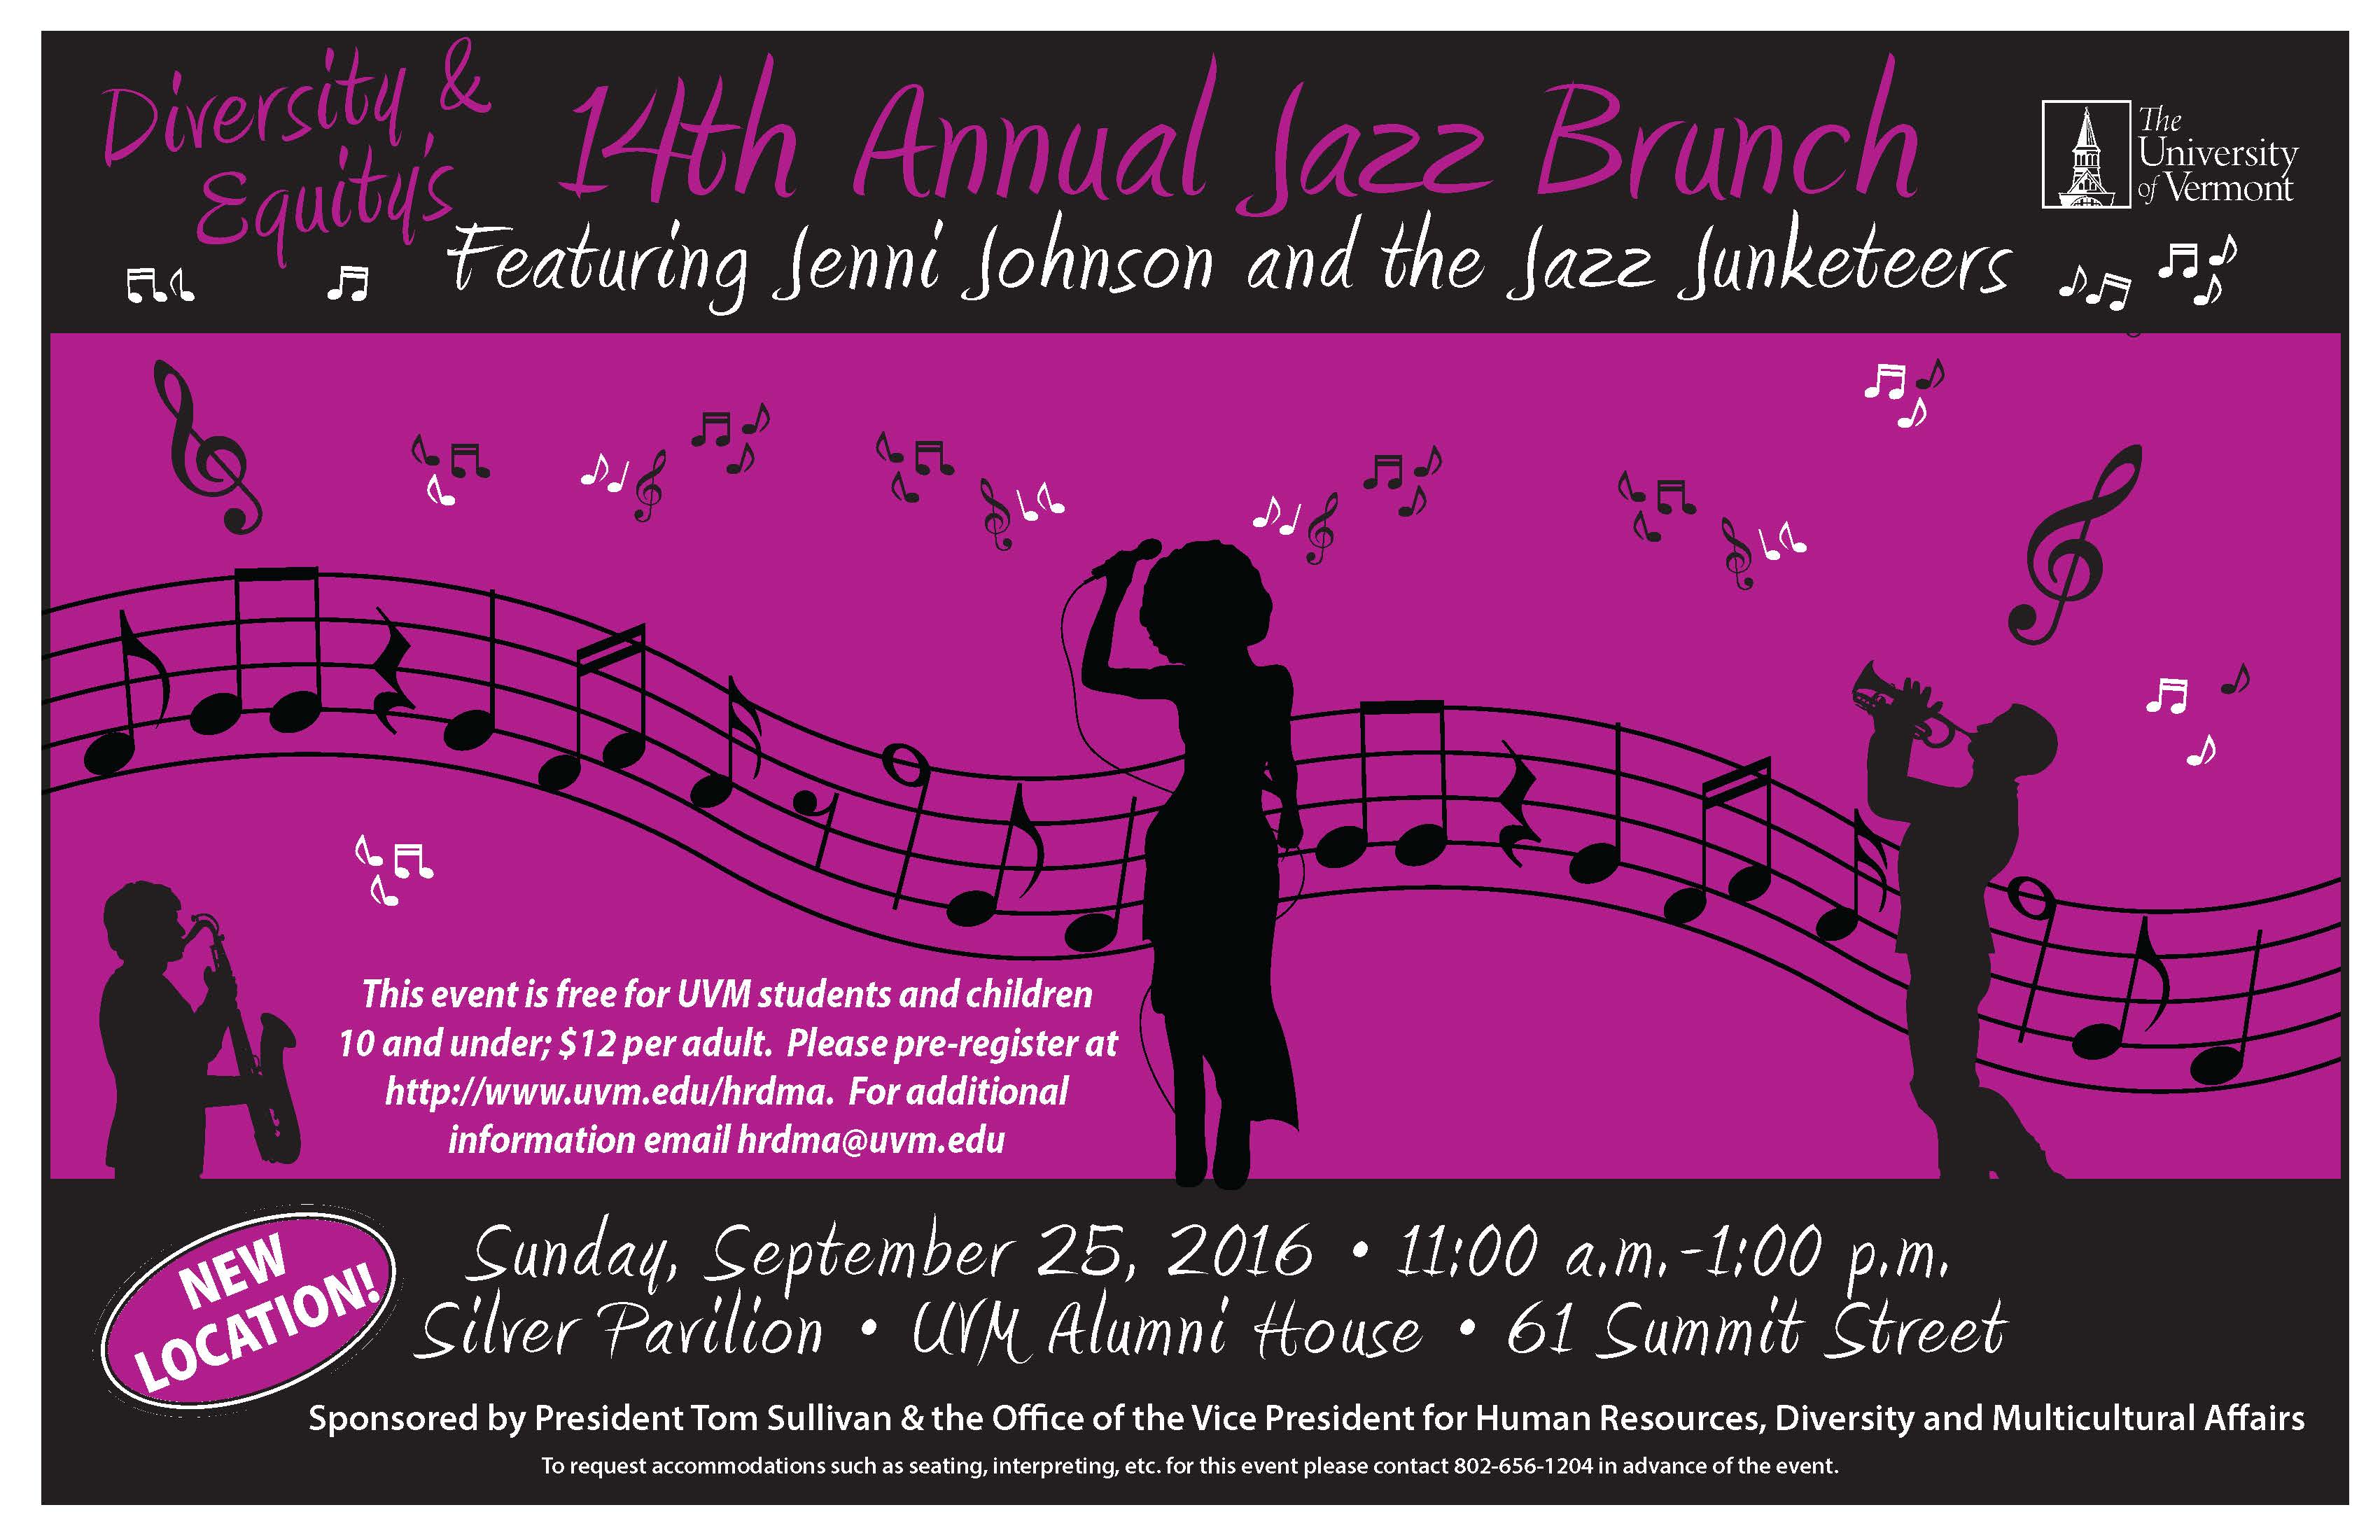 Diversity & Equity’s 14th Annual Jazz Brunch